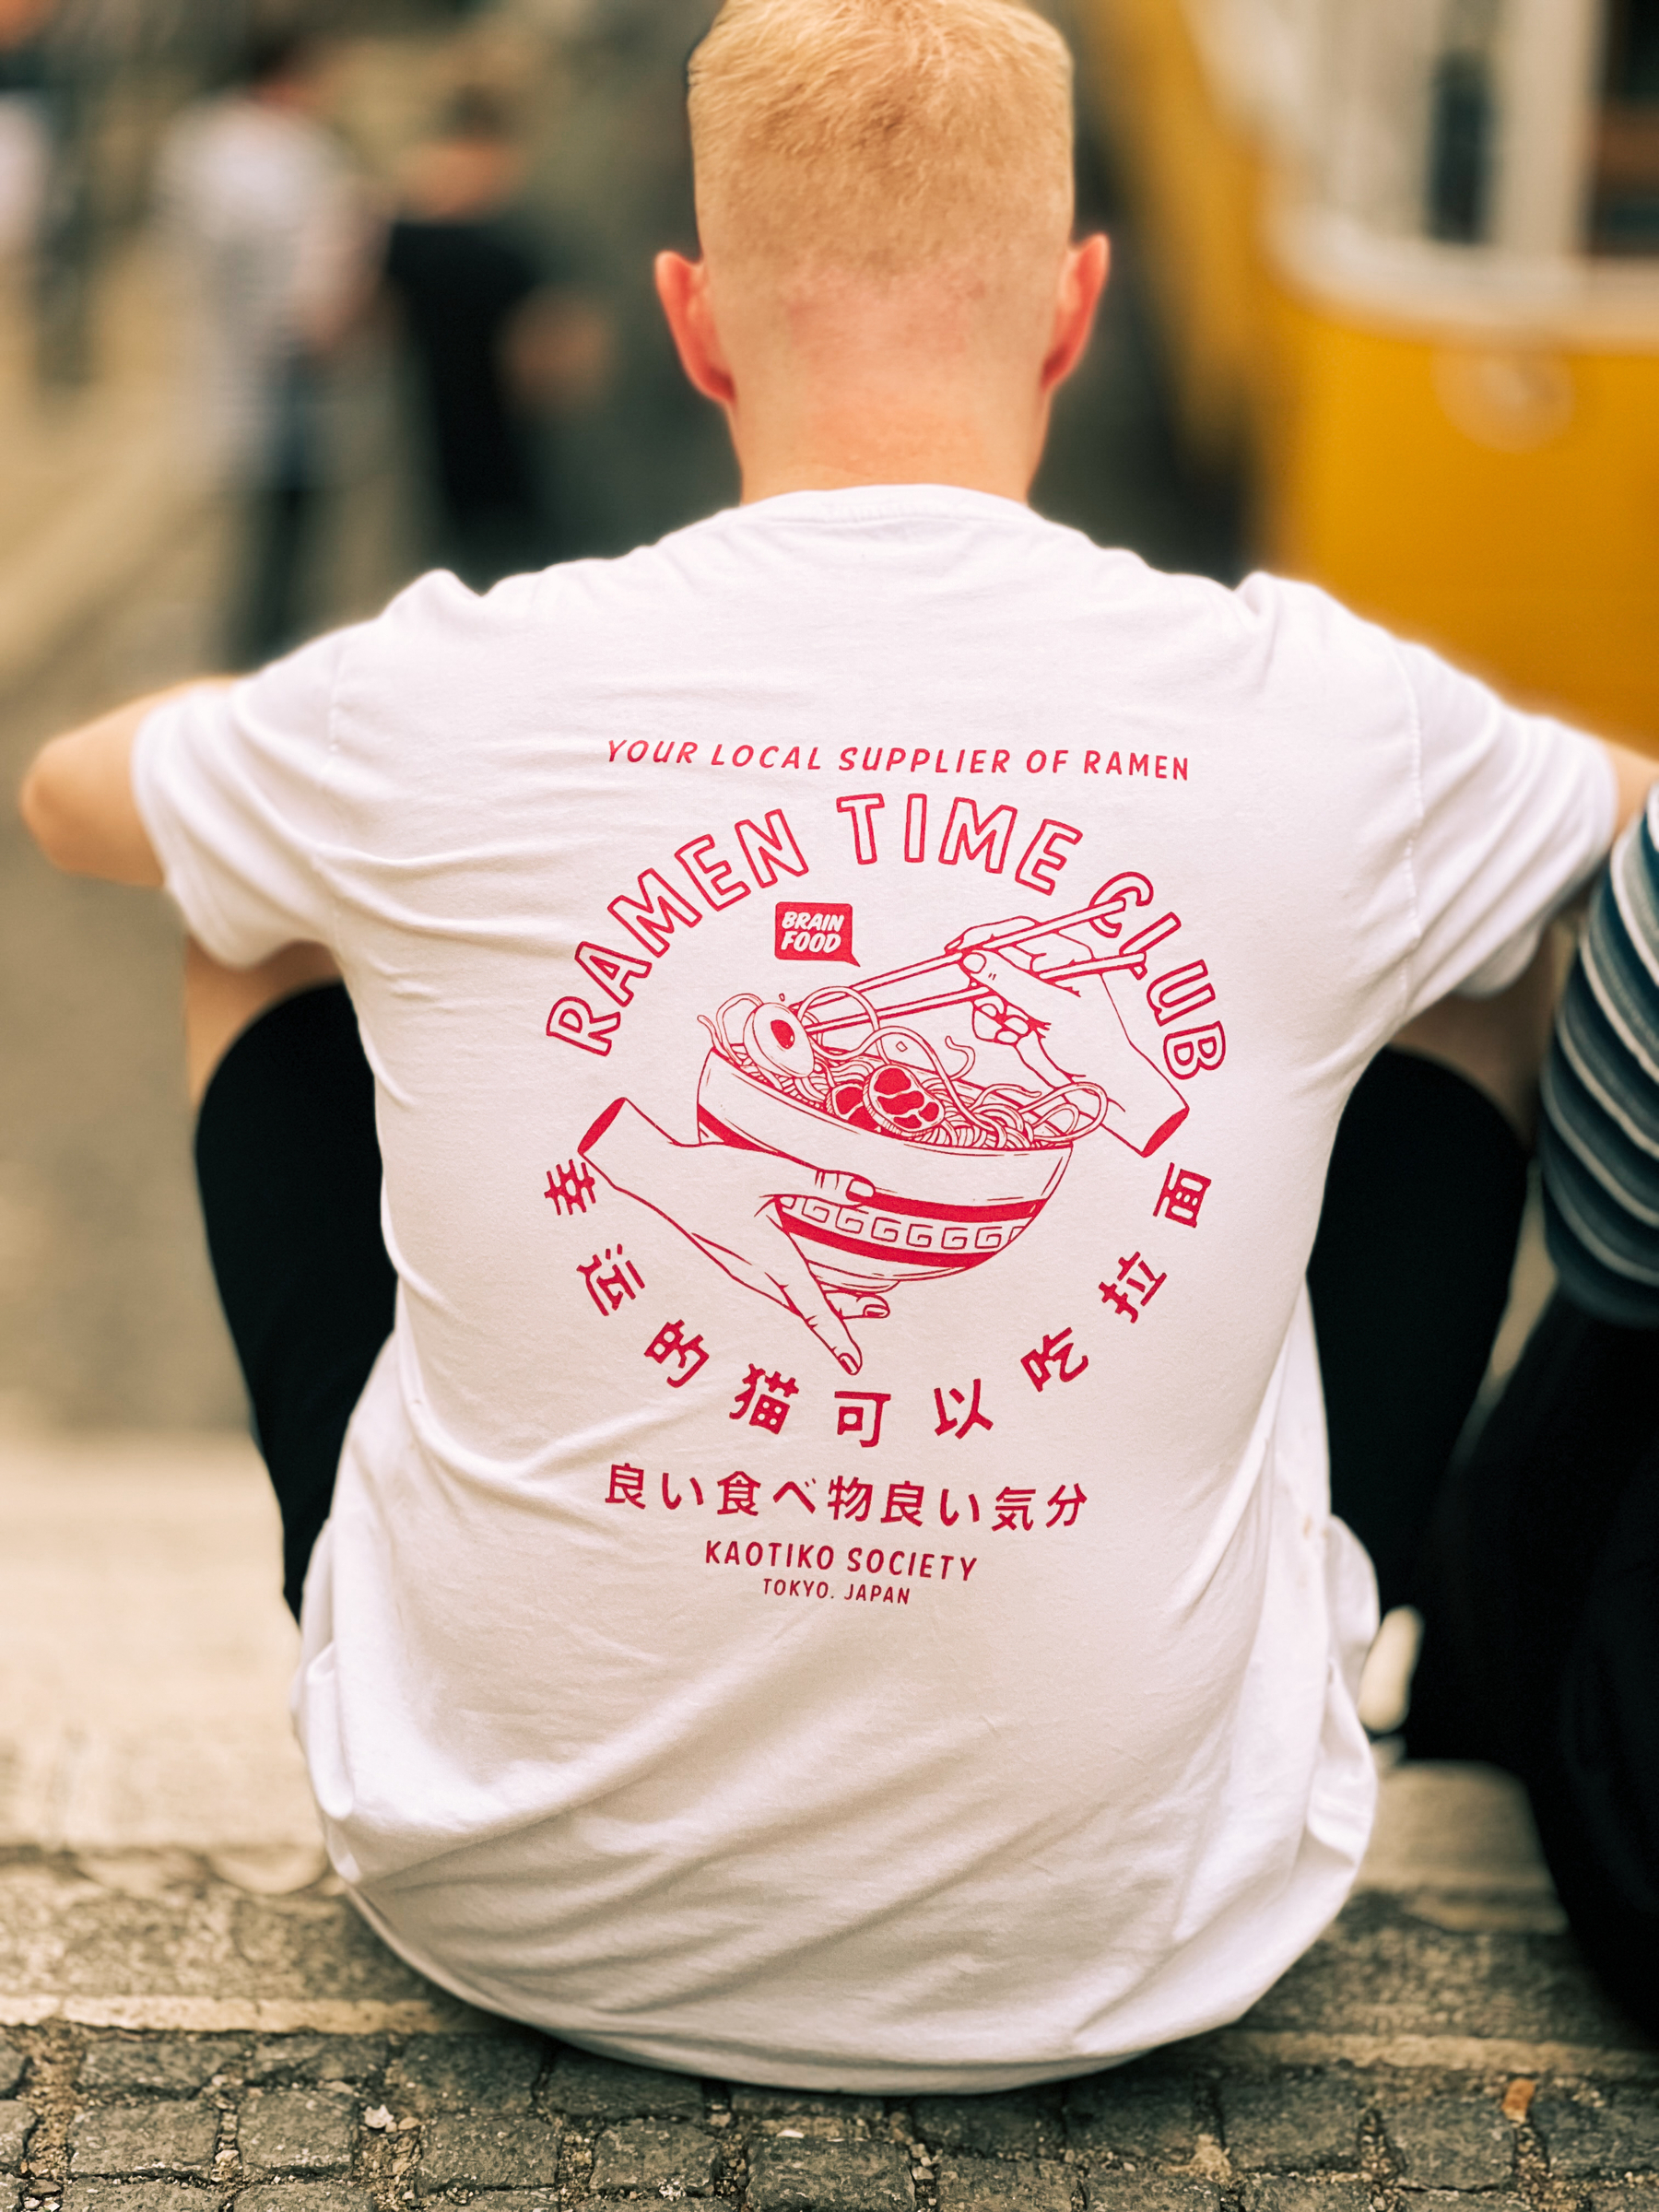 A “Ramen Time Club” t-shirt. The owner is sitting down on the ground, his back to us. 